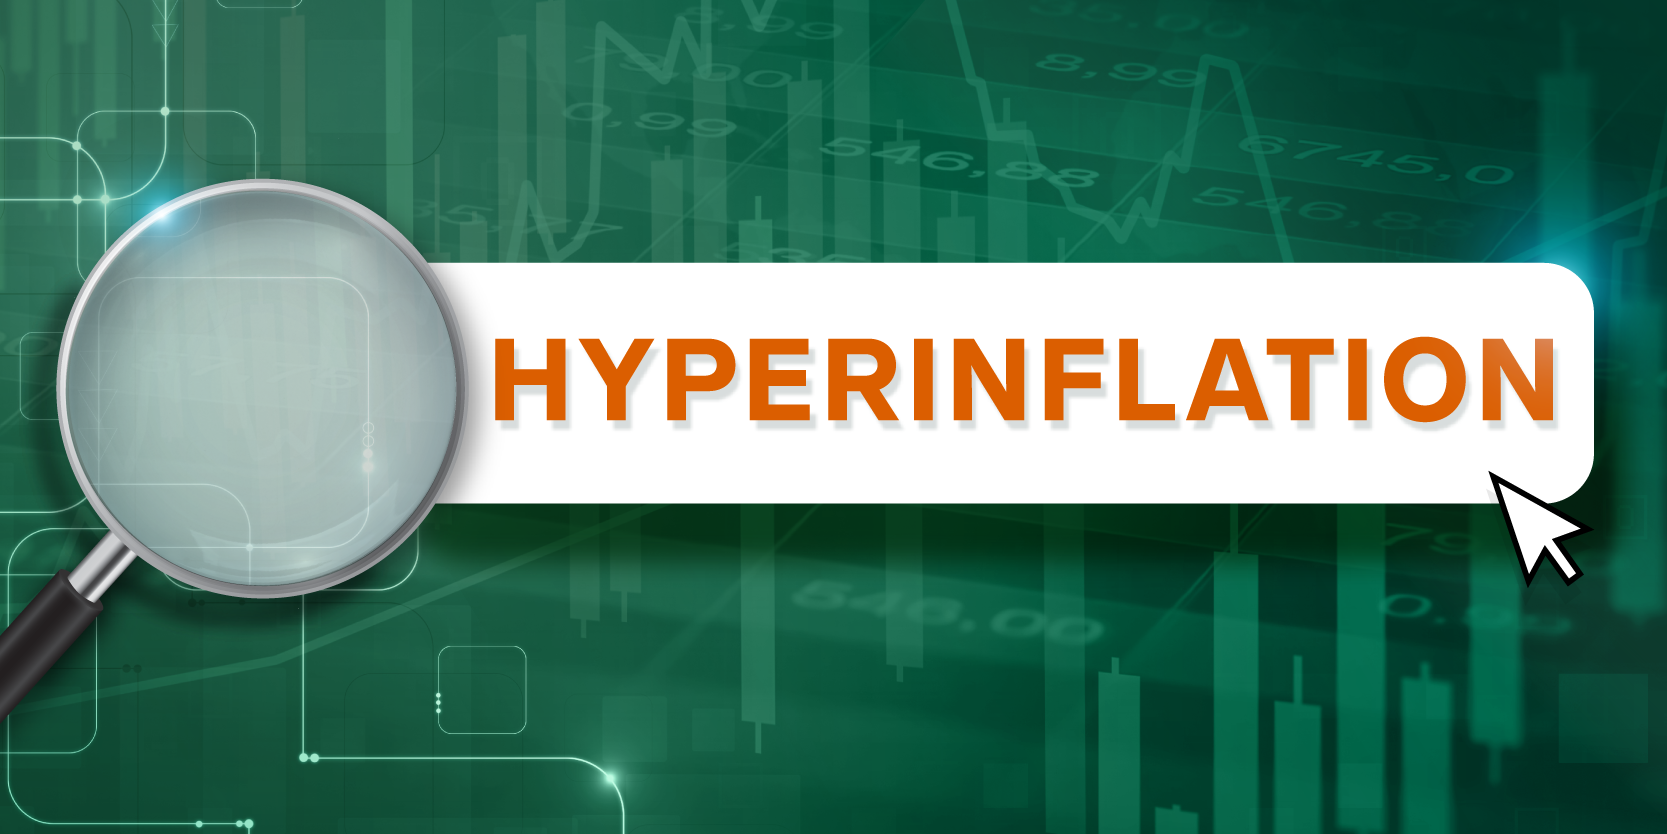 Large magnifying glass with orange text, "hyperinflation," on green background with stock chart 2x1